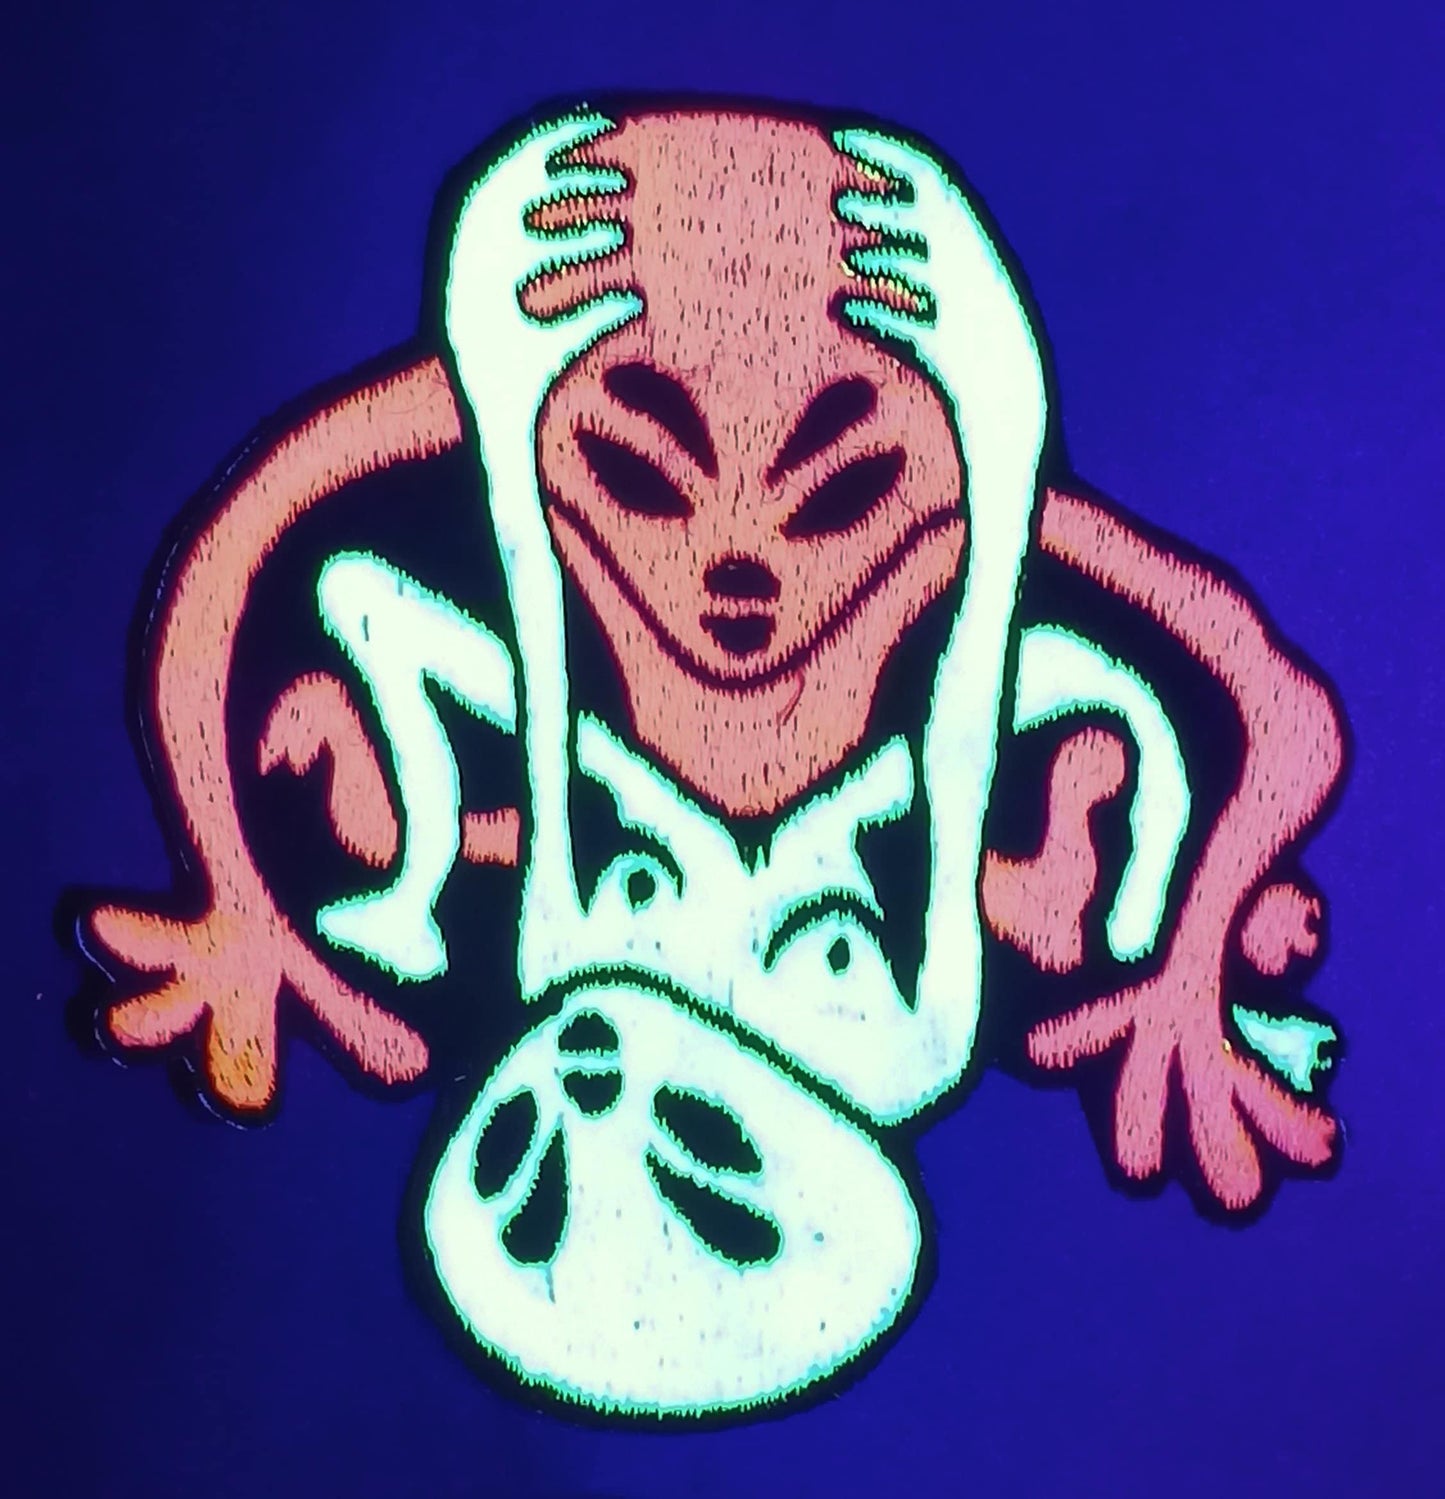 Alien Love Patch blacklight glowing embroidery - 3.5 inches - UV shining psychedelic Psytrance Extraterrestrial Sex is Fun Goa Trance Party